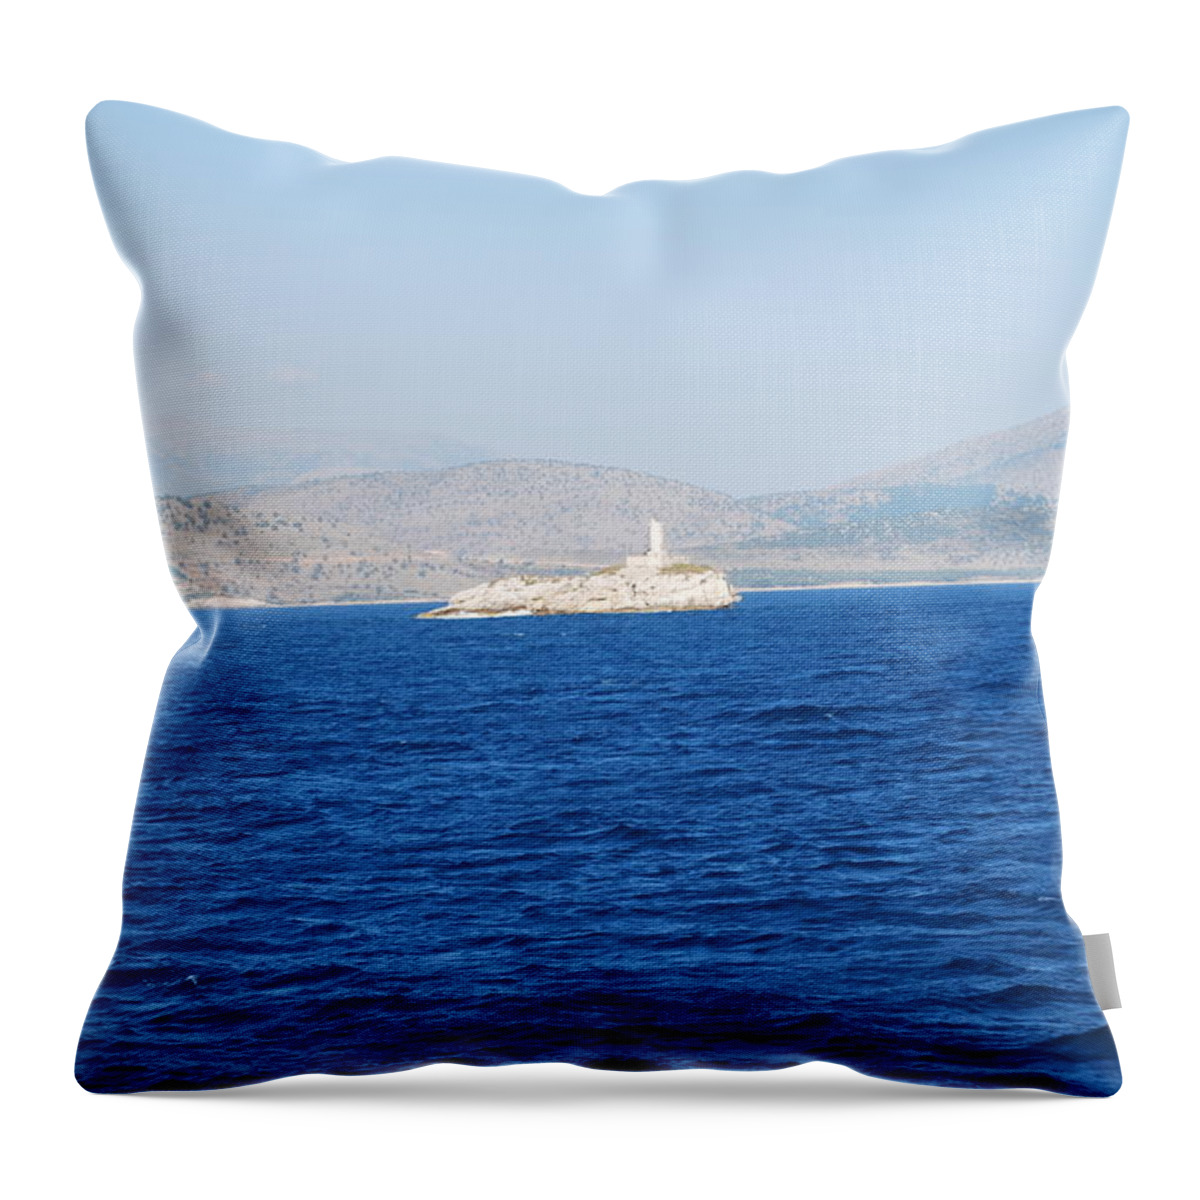 Corfu Channel Throw Pillow featuring the photograph Corfu Channel Lighthouse by George Katechis